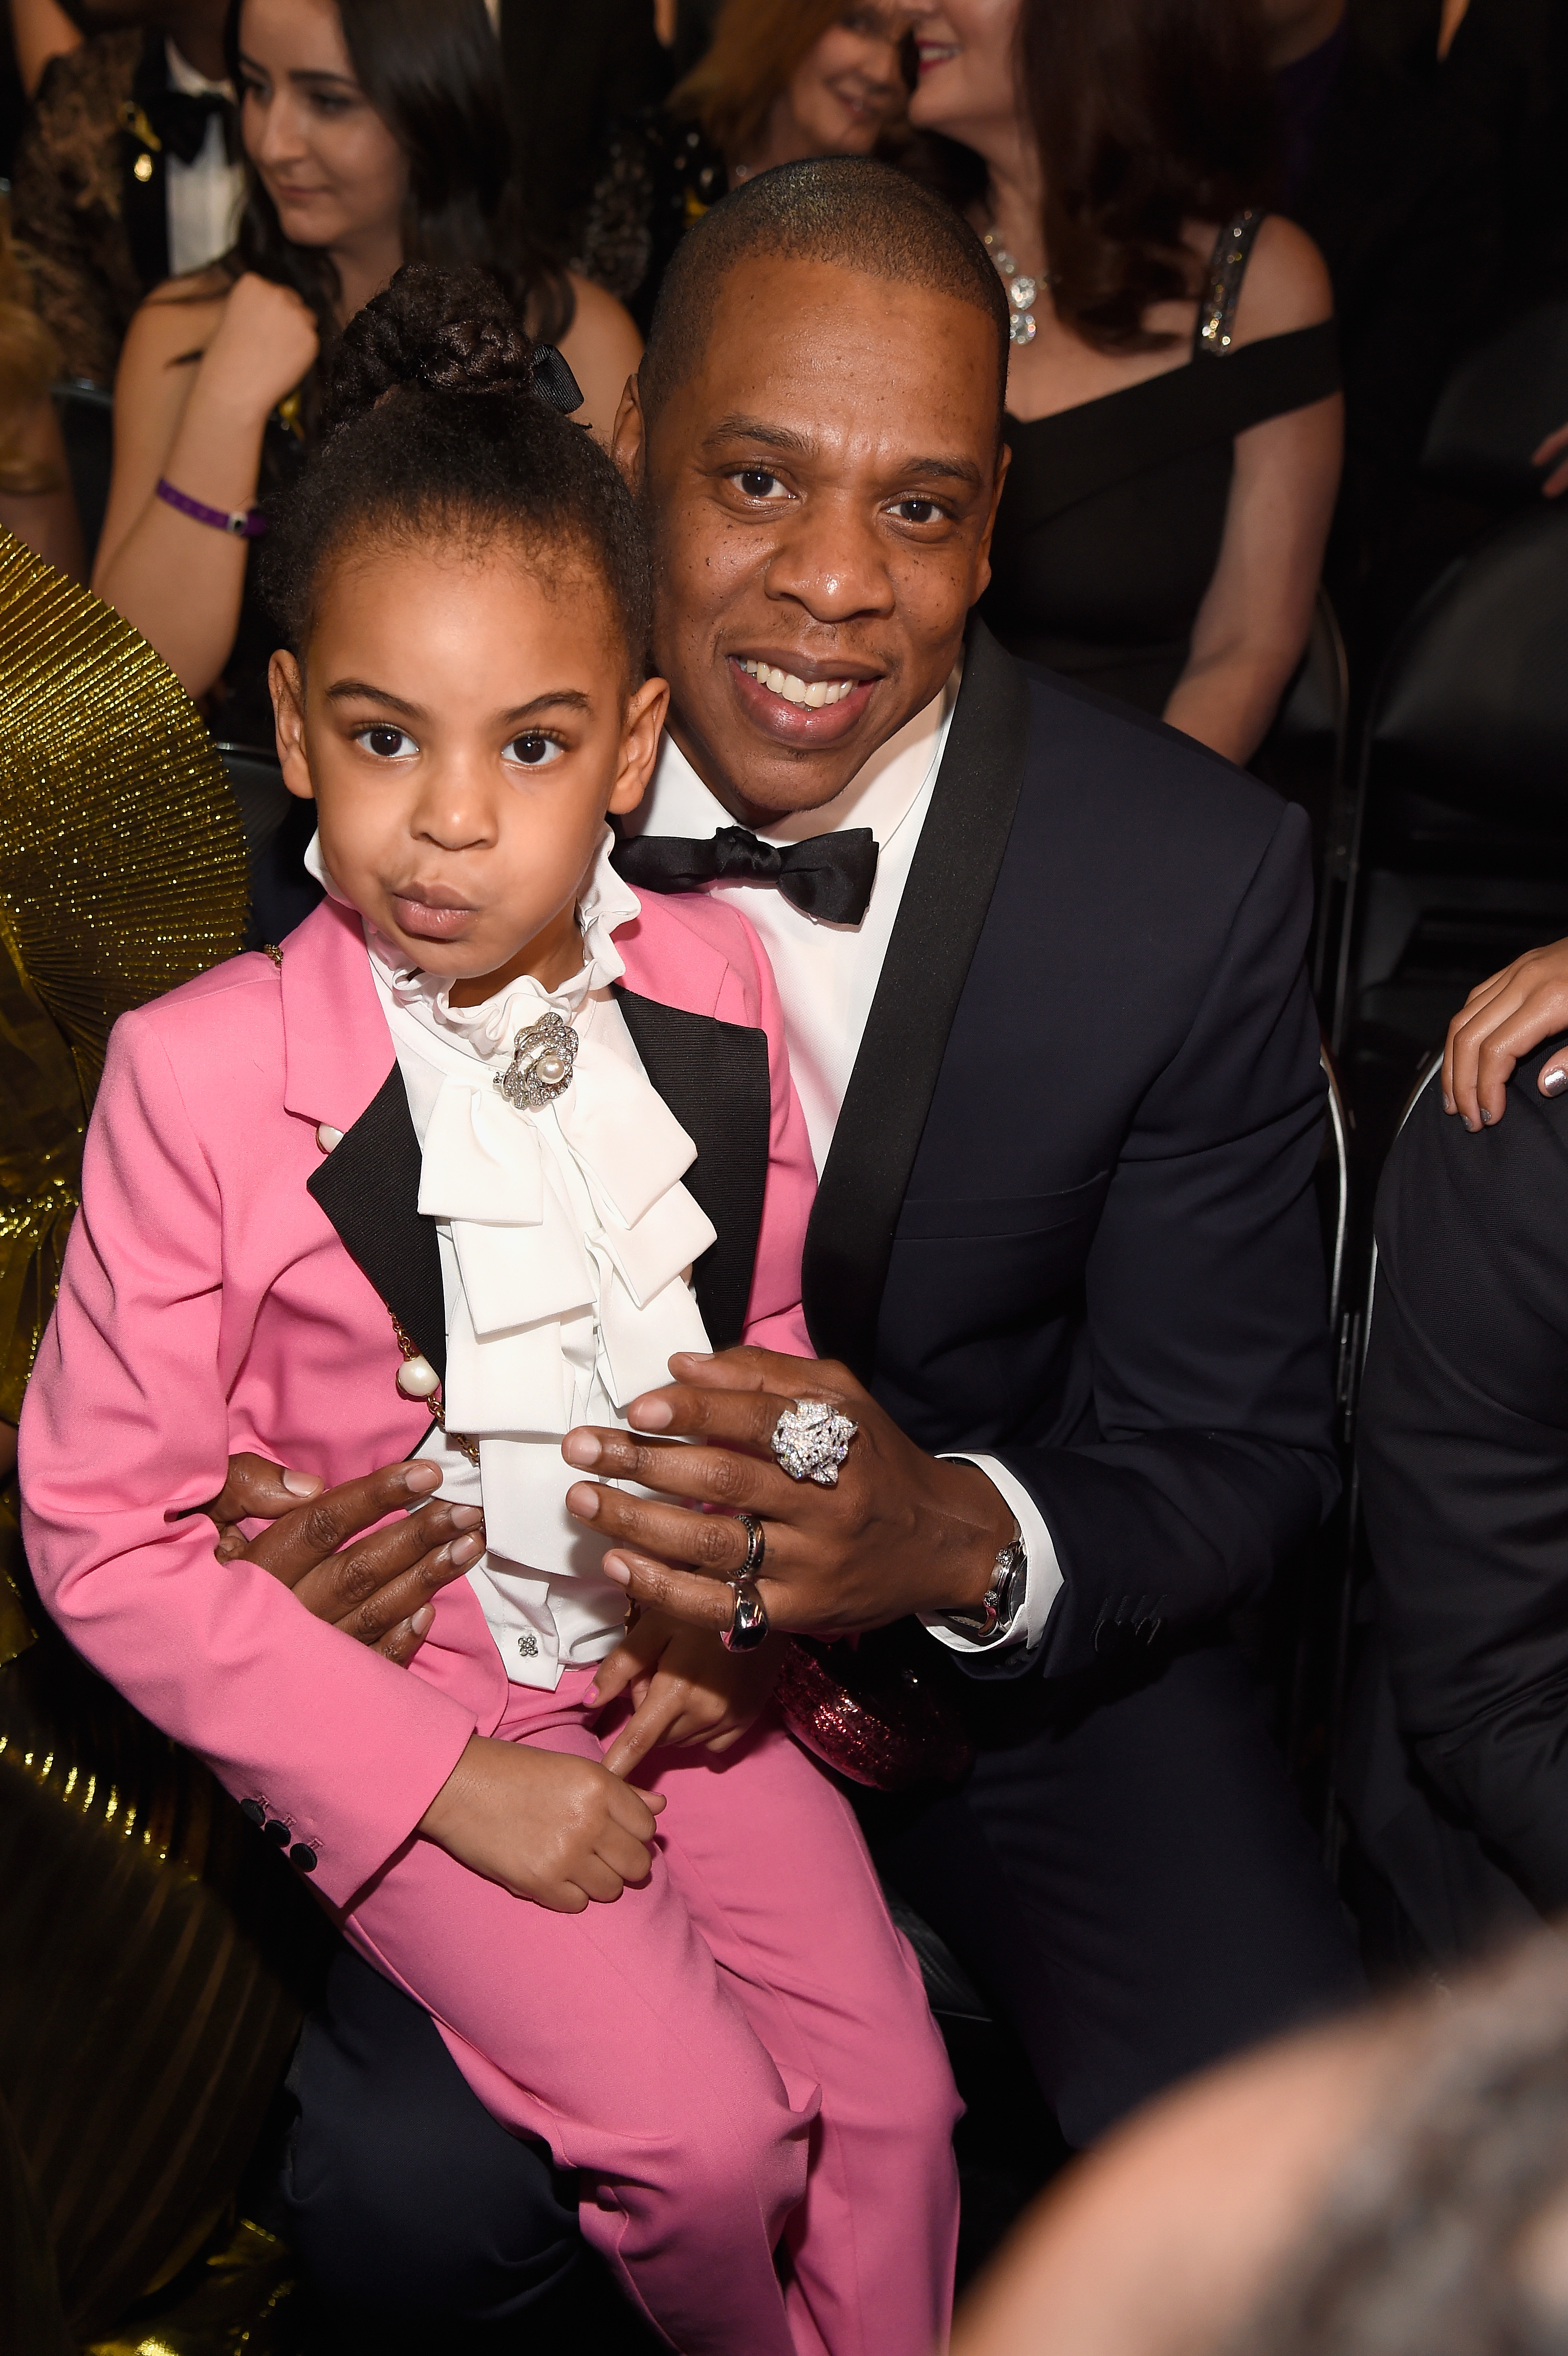 Blue Ivy Carter and Jay Z during The 59th GRAMMY Awards on February 12, 2017 in Los Angeles, California | Source: Getty Images